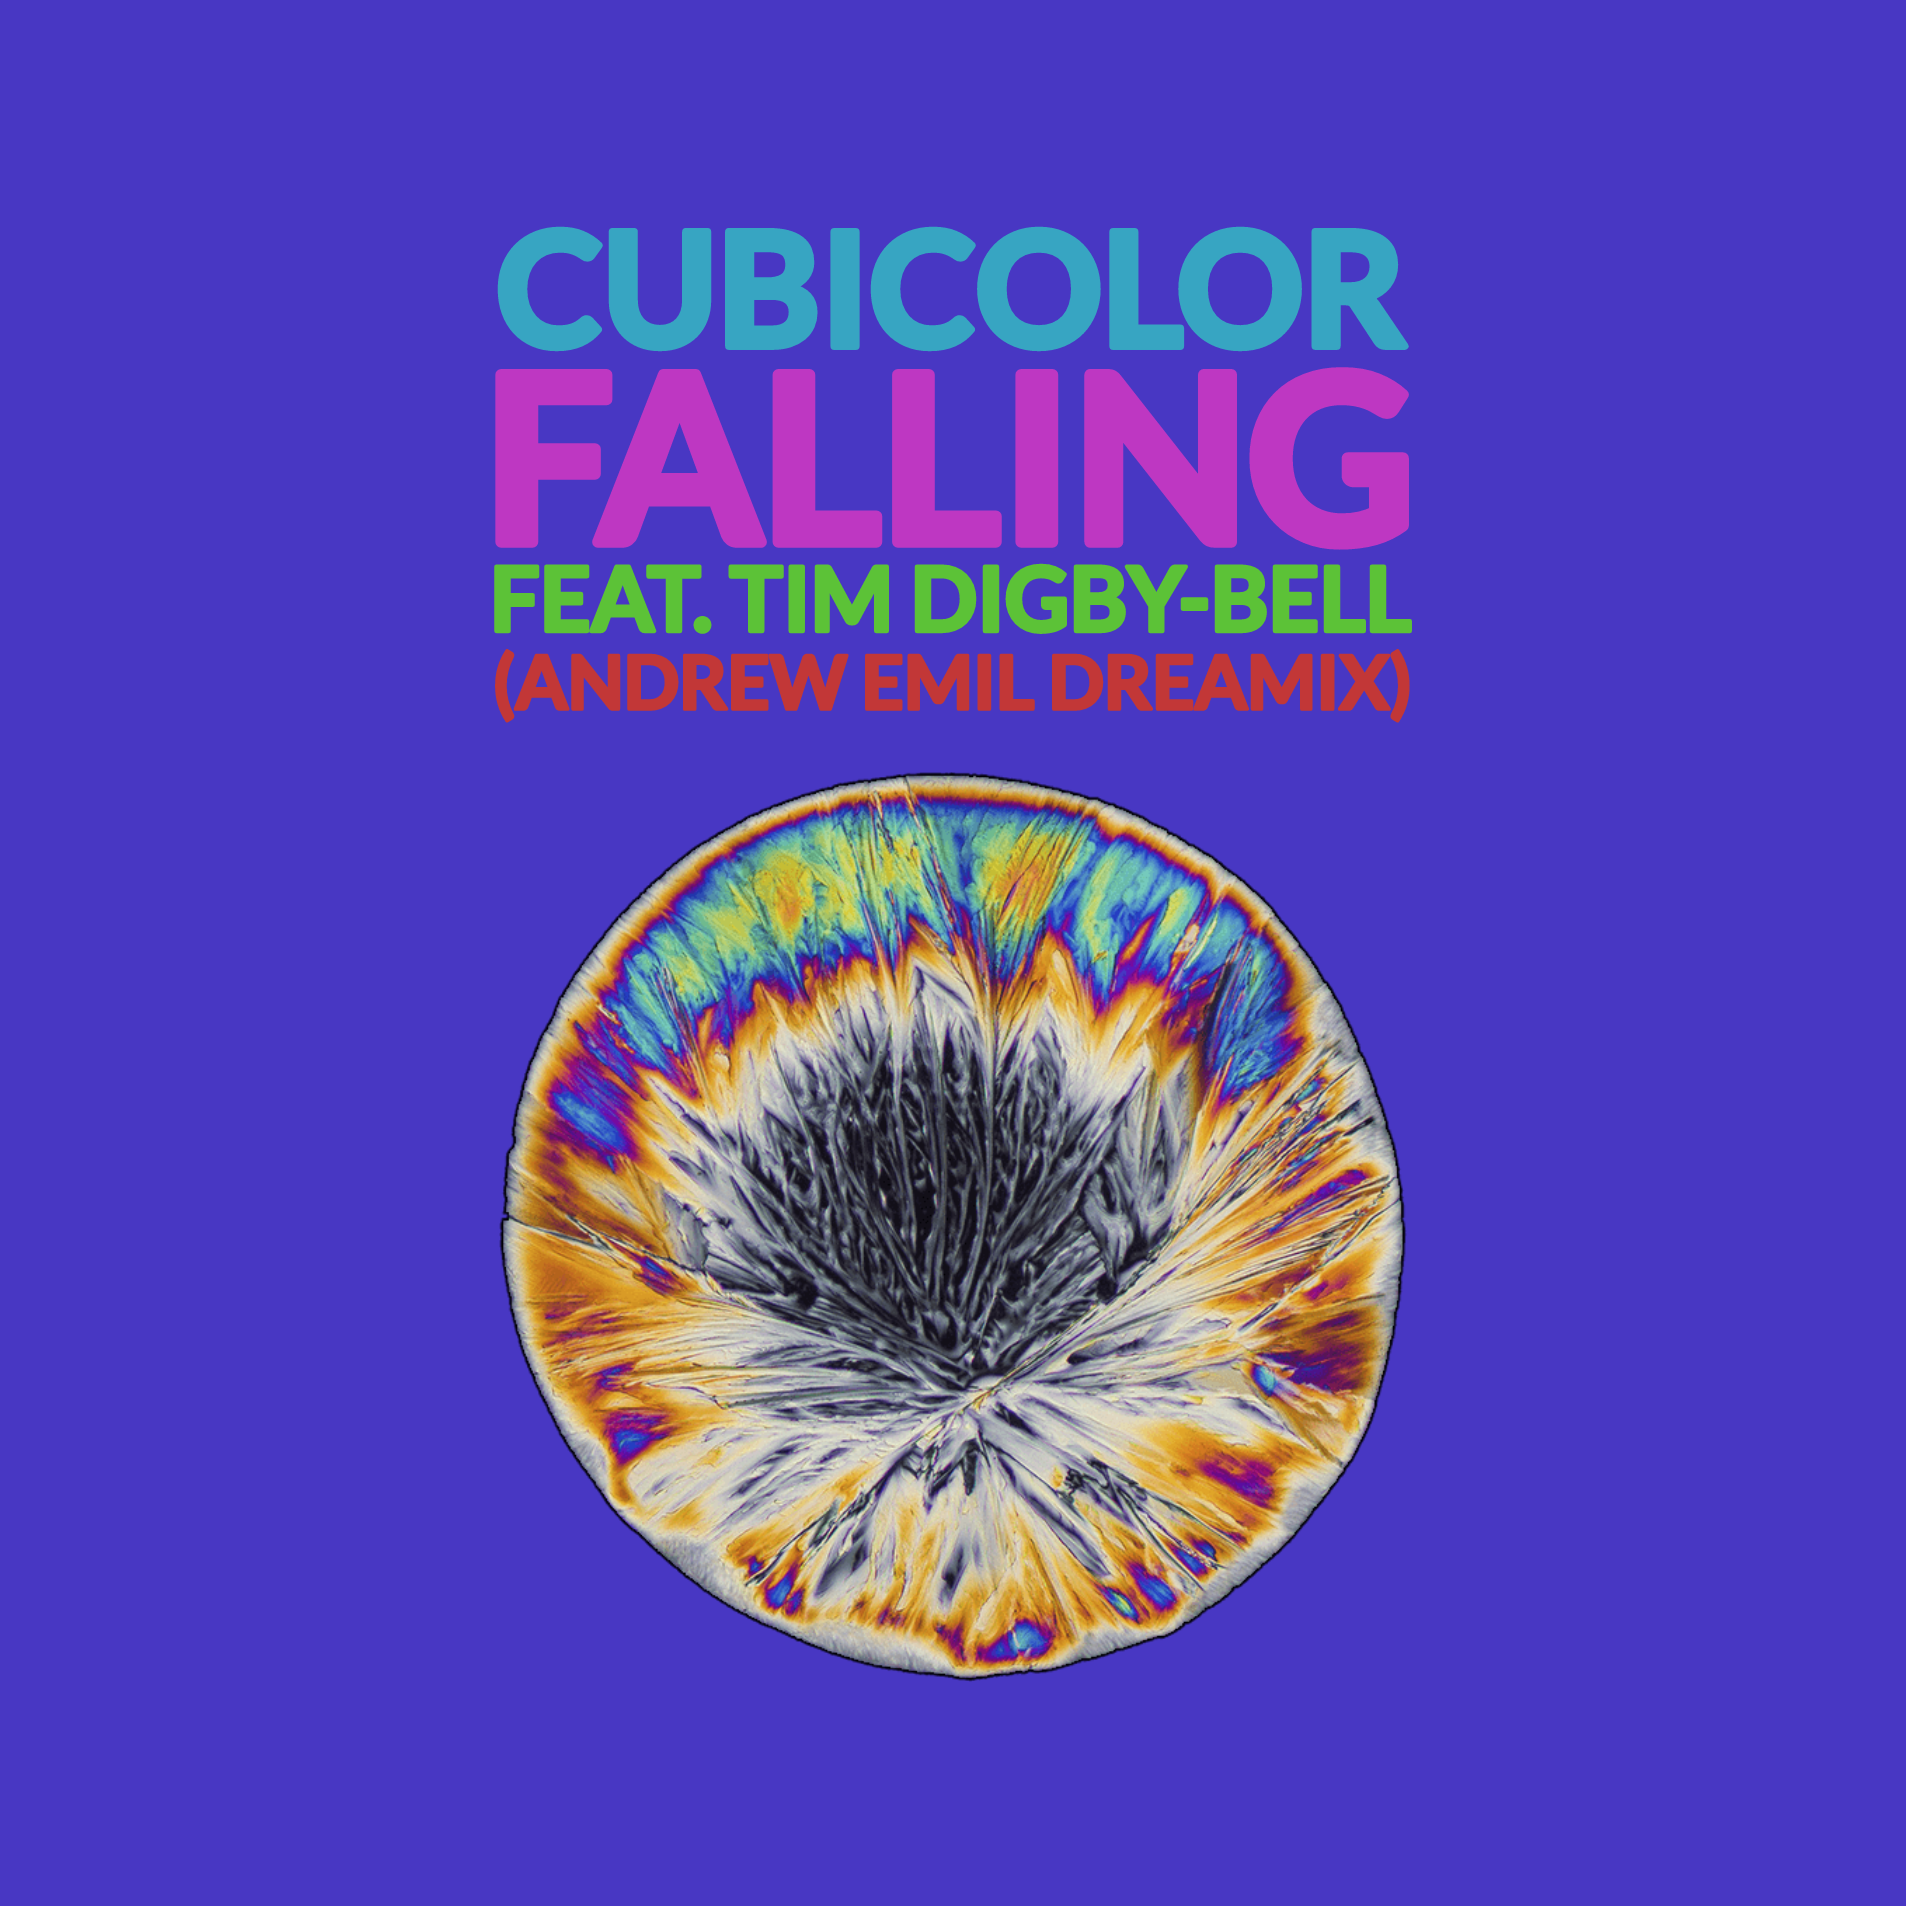 Falling Feat. Tim Digby-Bell (Andrew Emil Dreamix)